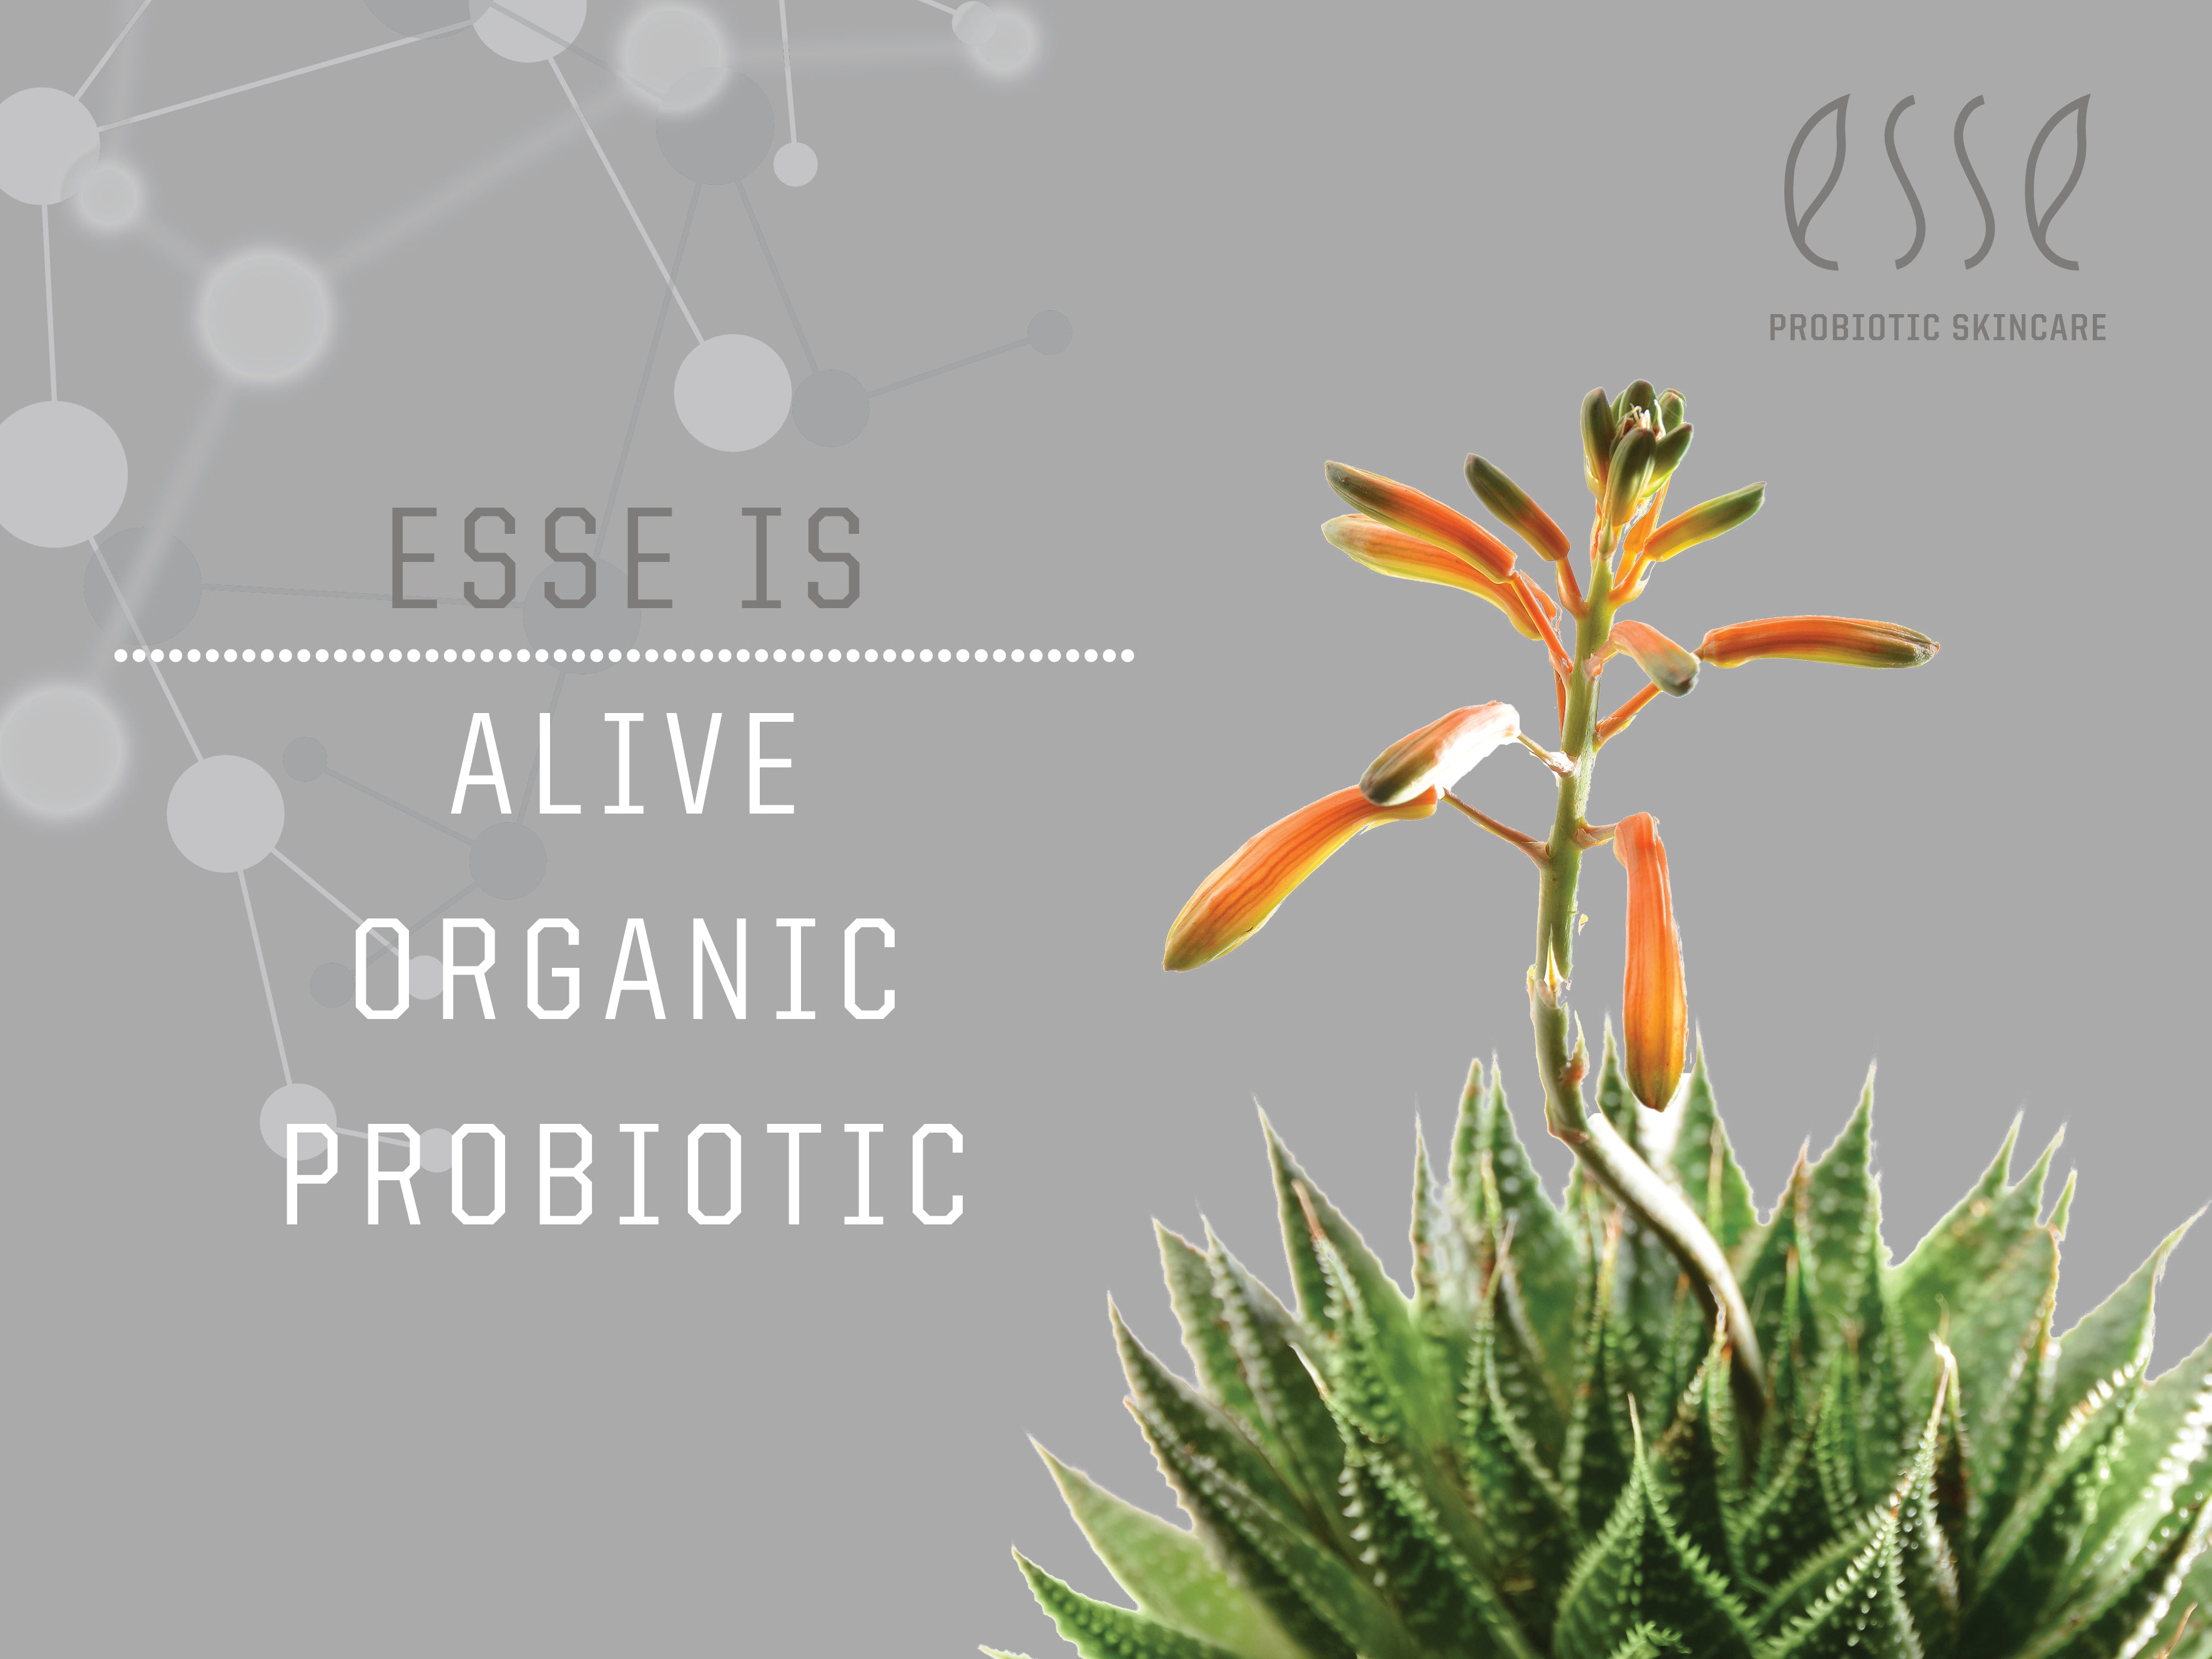 Esse is Alive, Organic and Probiotic